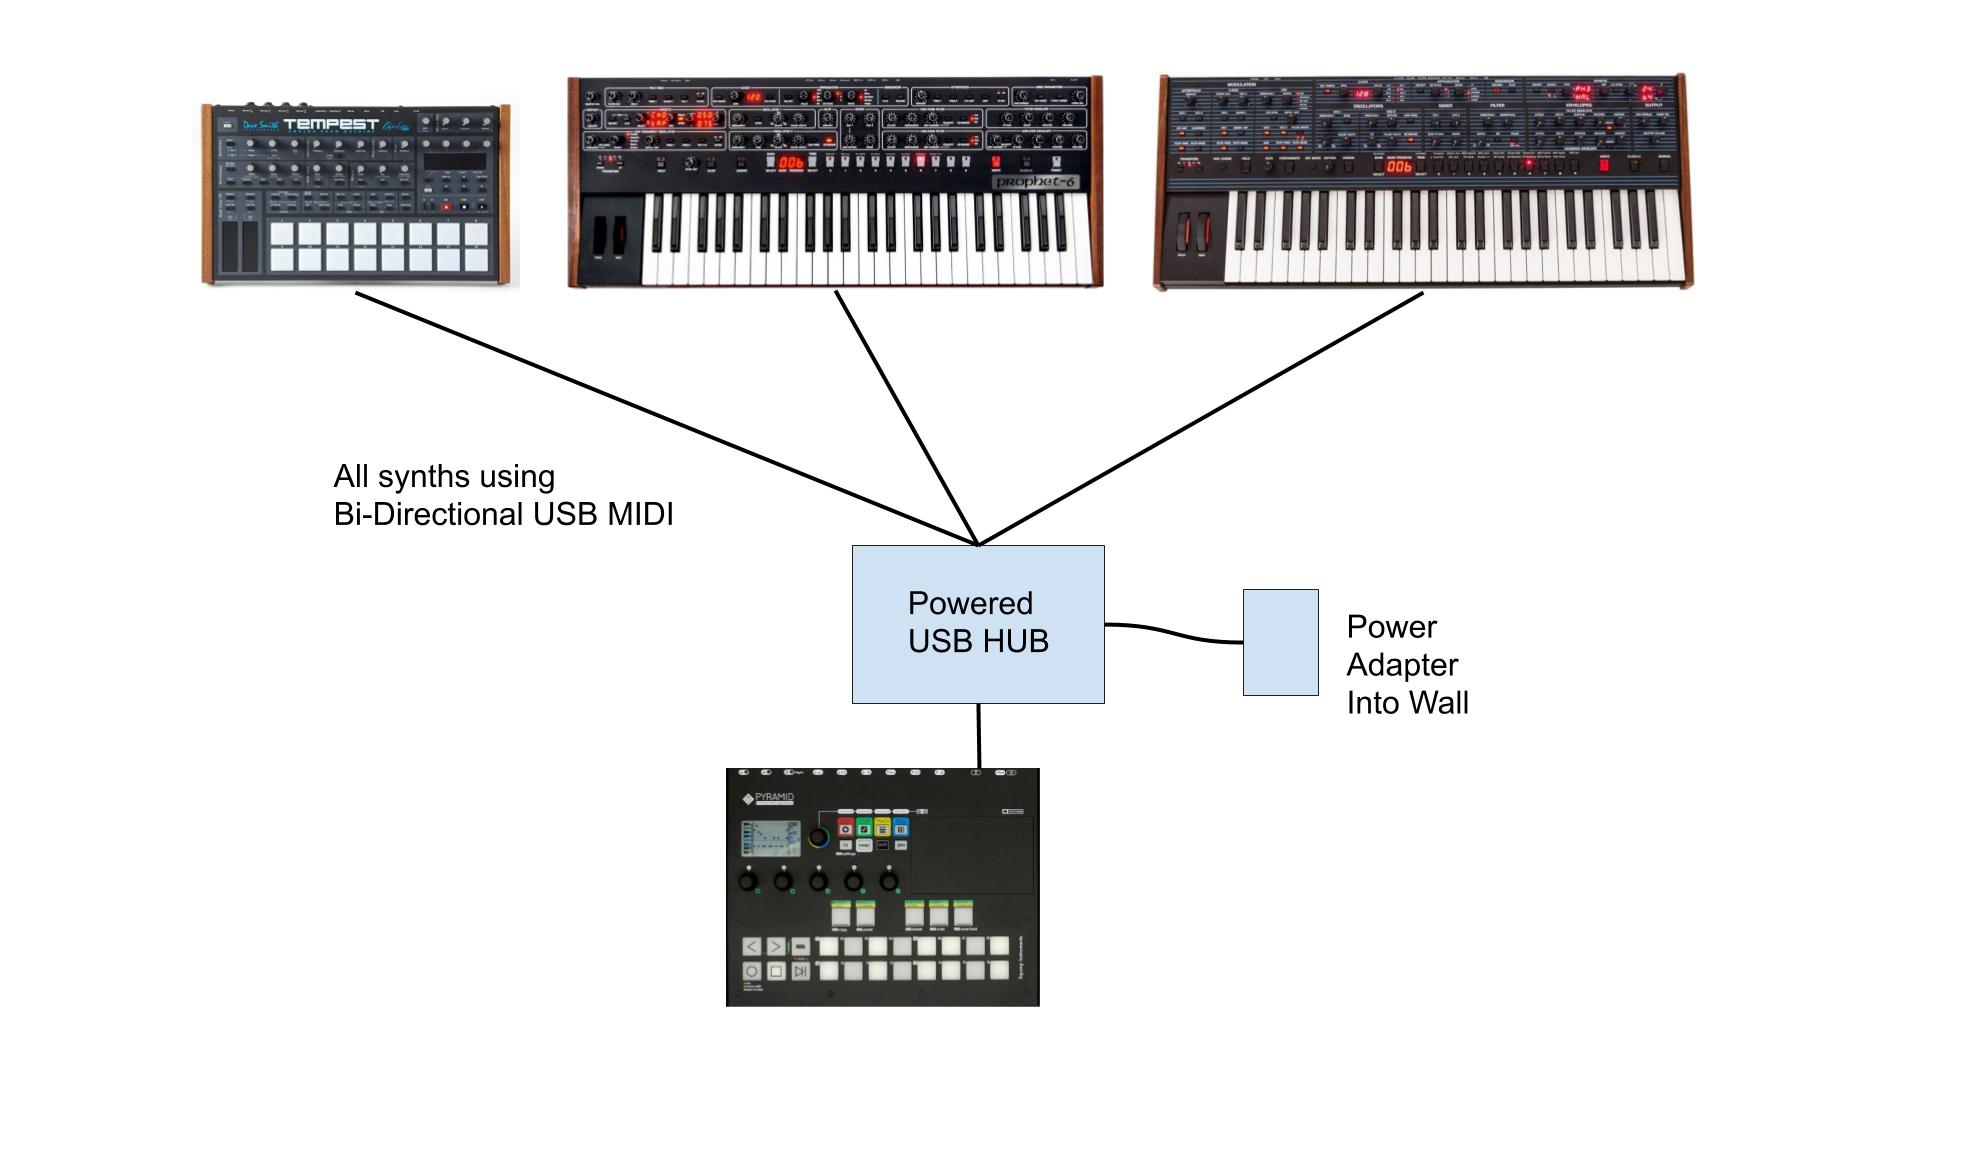 how to connect multiple midi devices